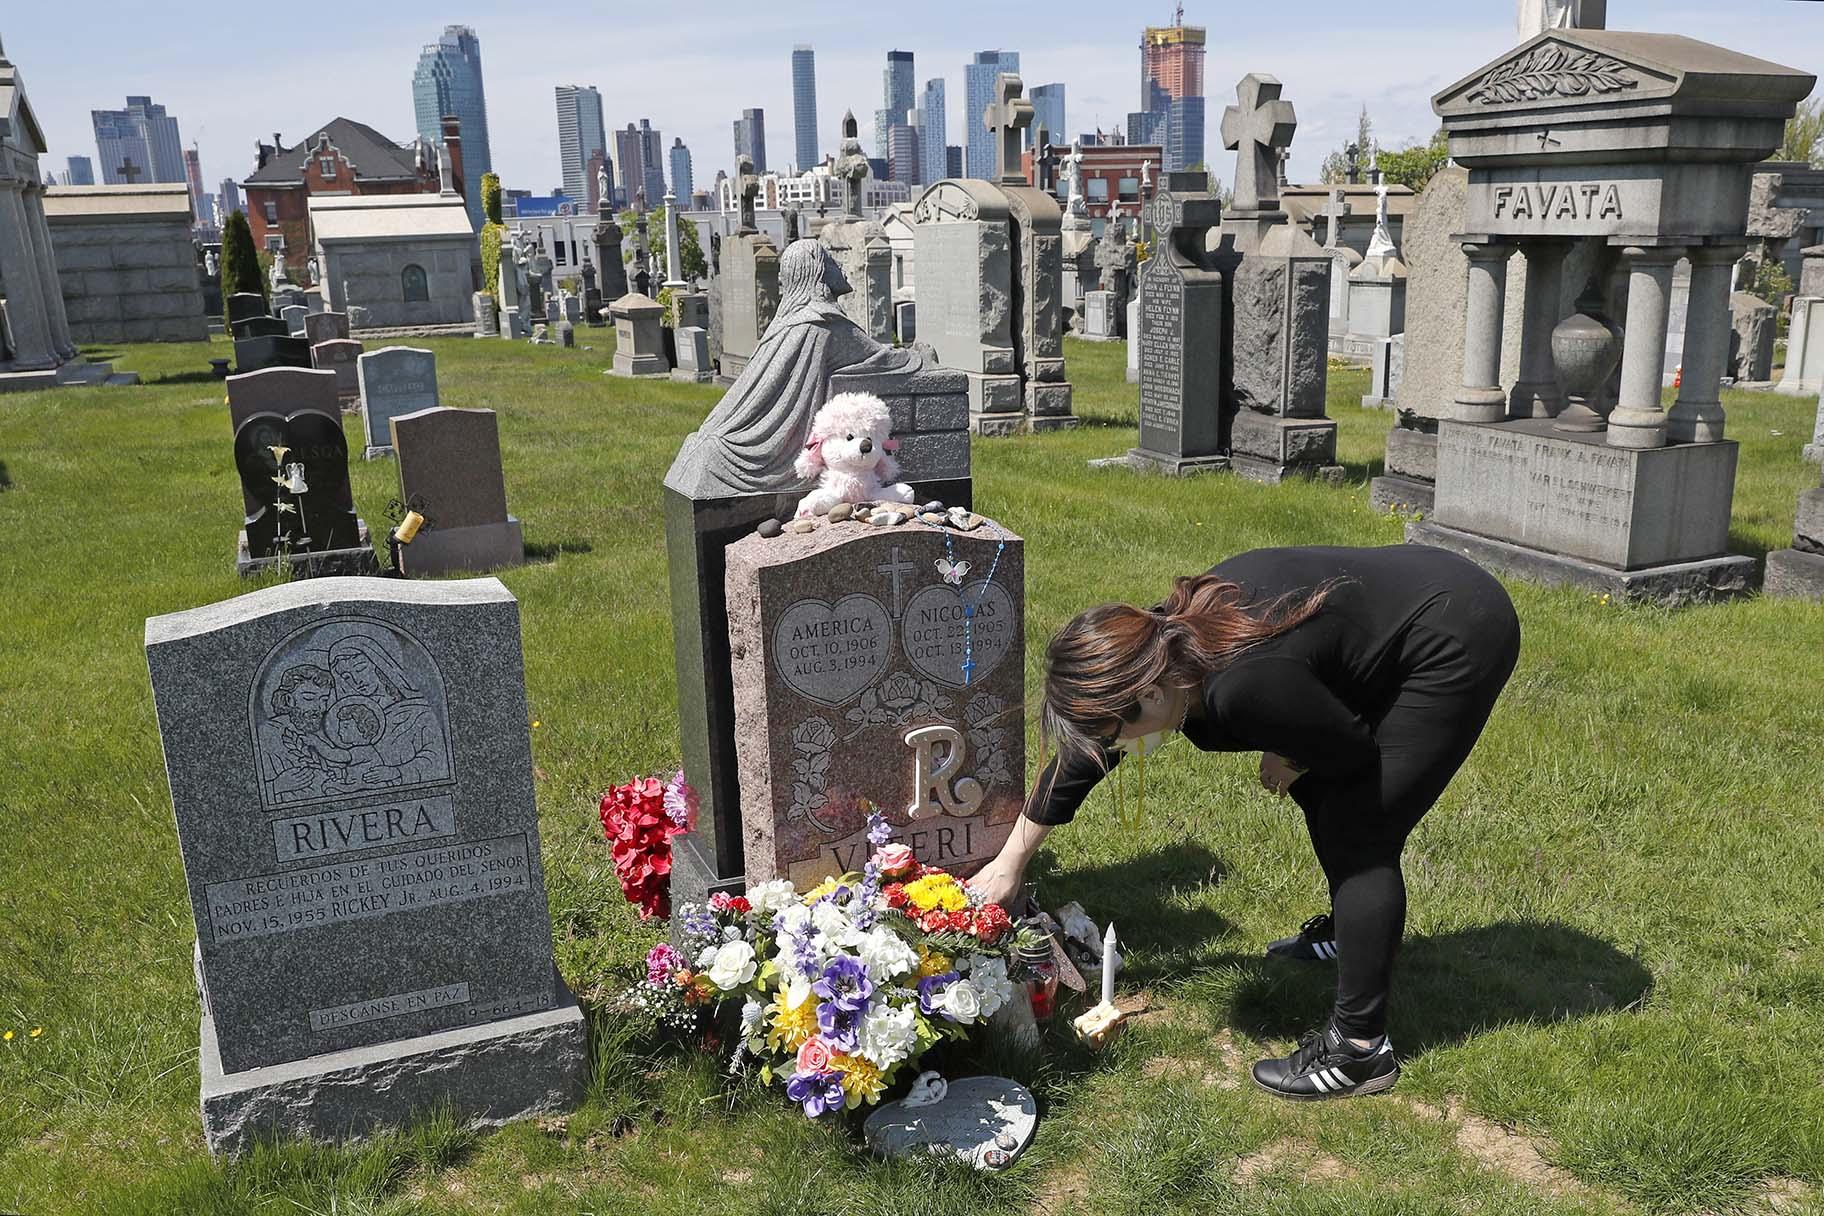 In this Sunday, May 10, 2020 file photo, Sharon Rivera adjusts flowers and other items left at the grave of her daughter, Victoria, at Calvary Cemetery in New York, on Mother’s Day. (AP Photo / Kathy Willens, File)